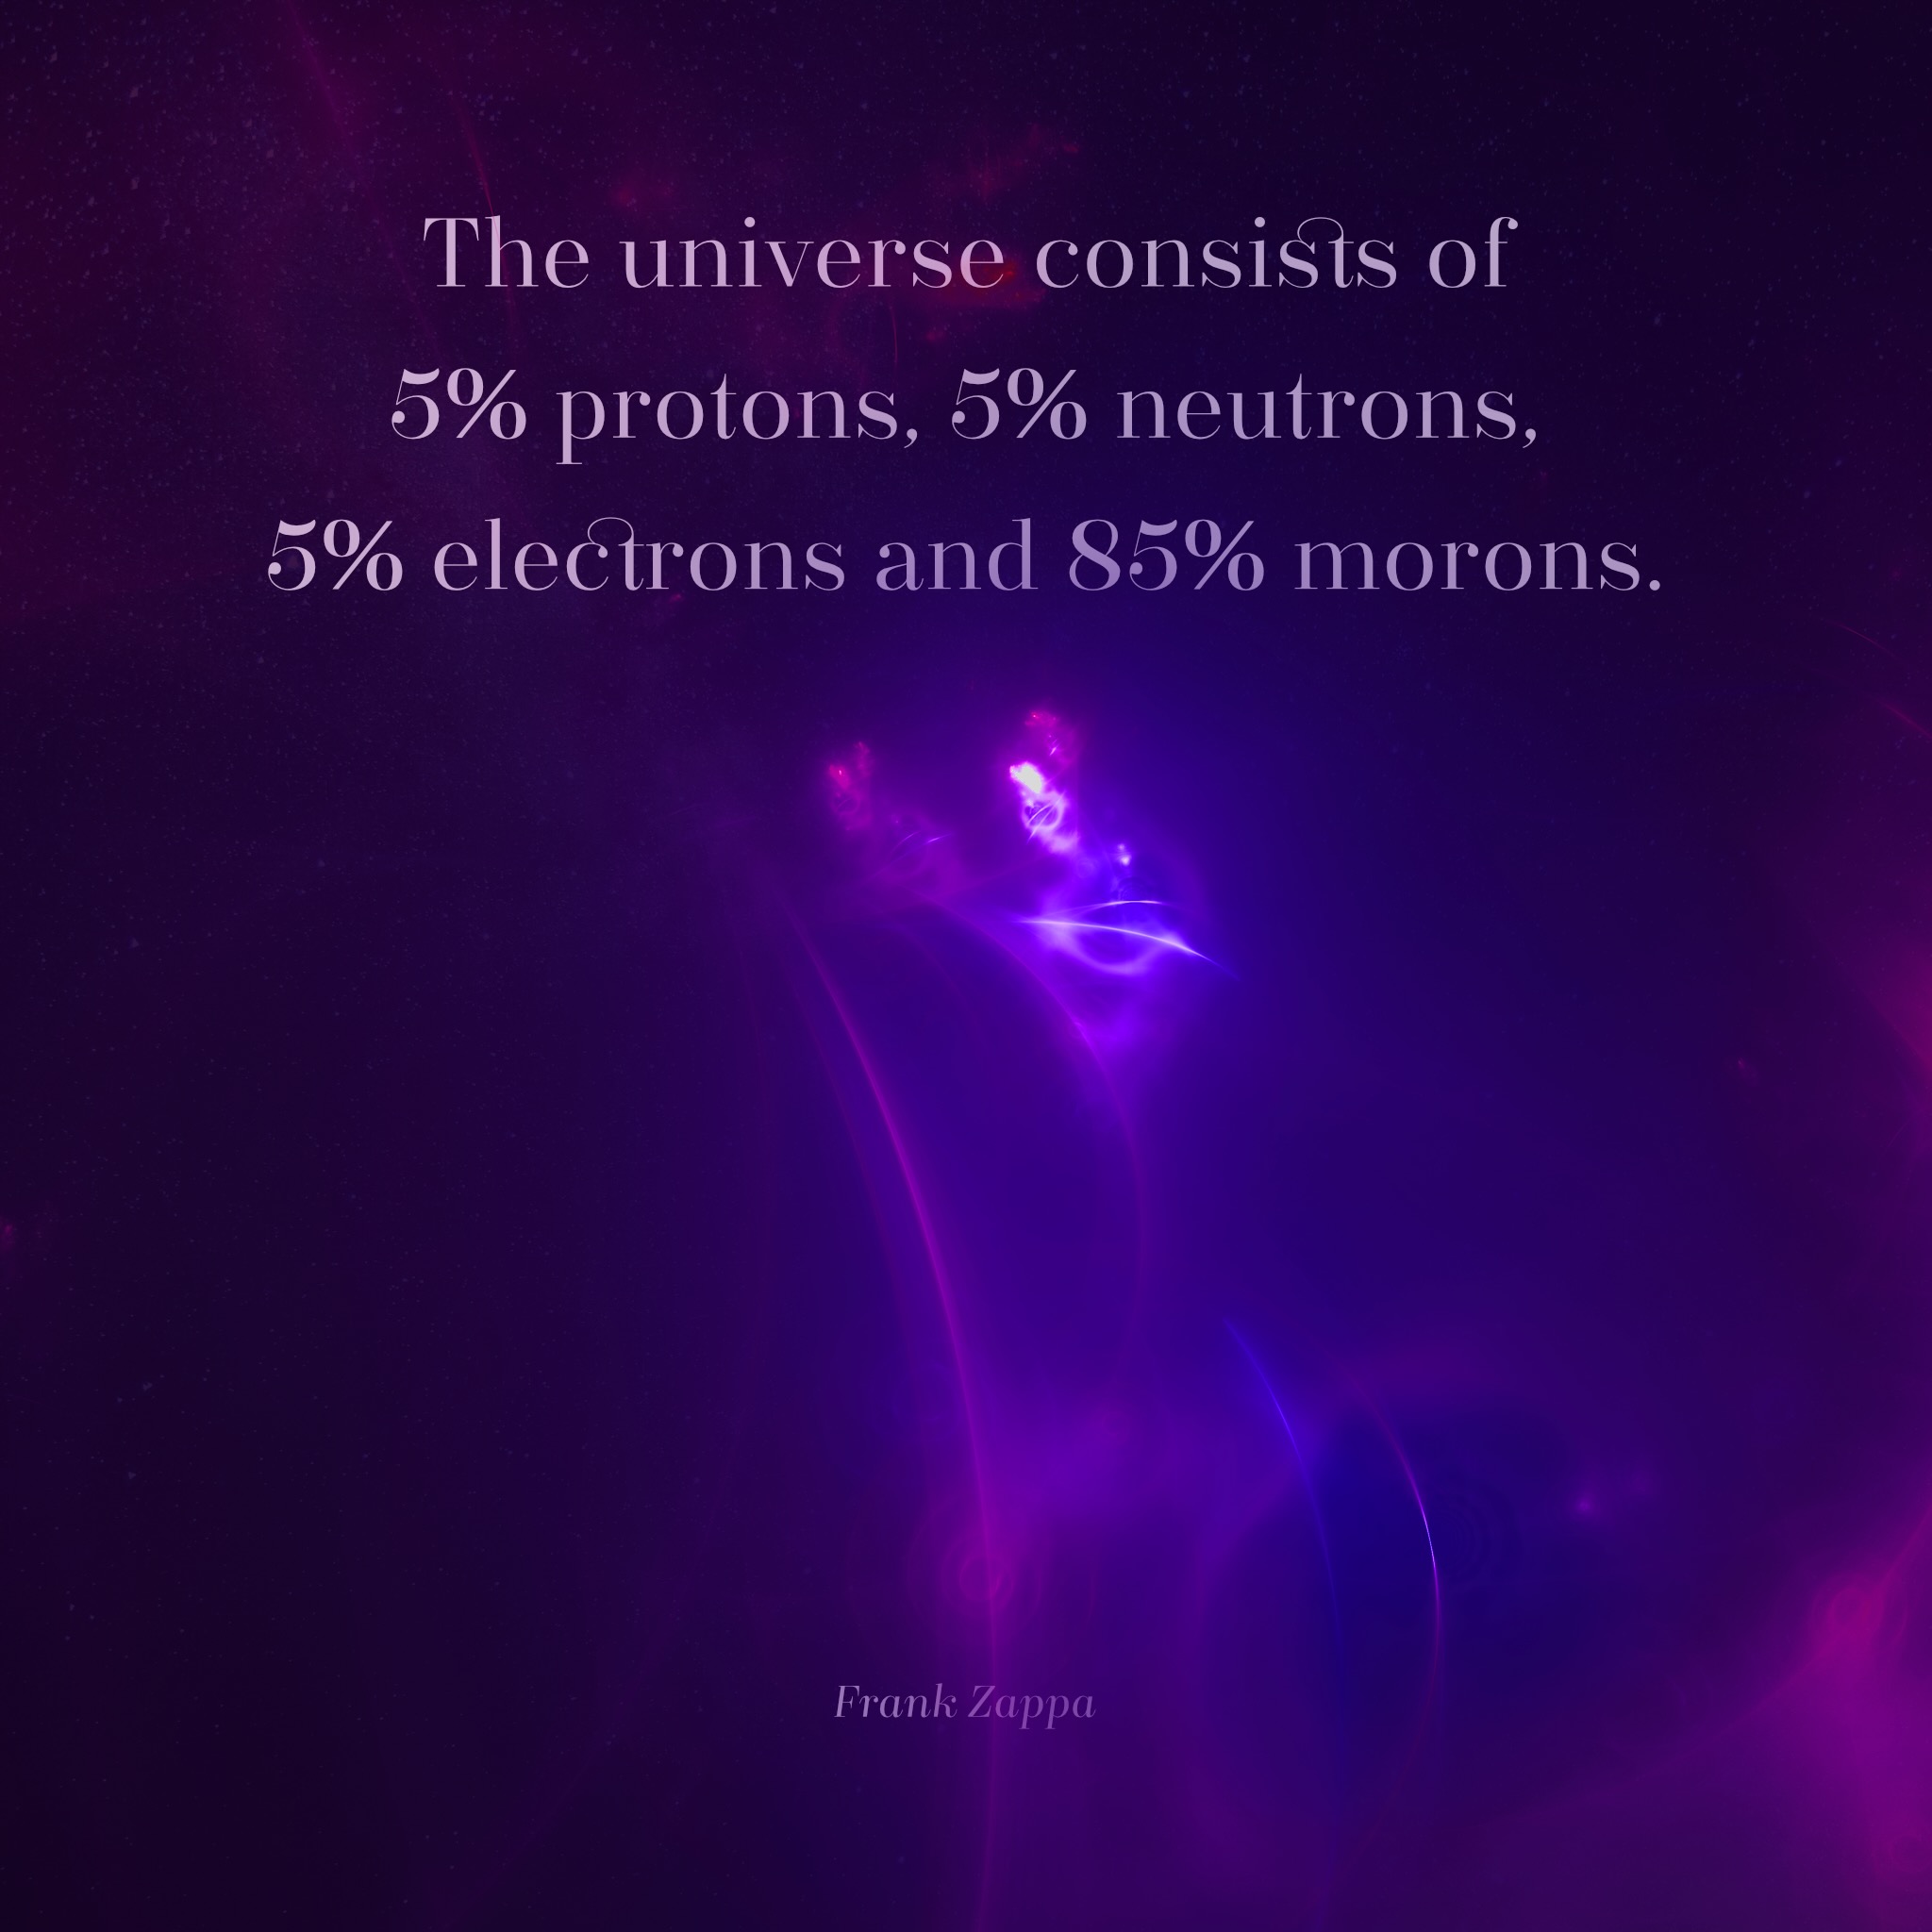 The Universe consists of 5% protons, 5% neutrons, 5% electrons and 85% morons. - Frank Zappa